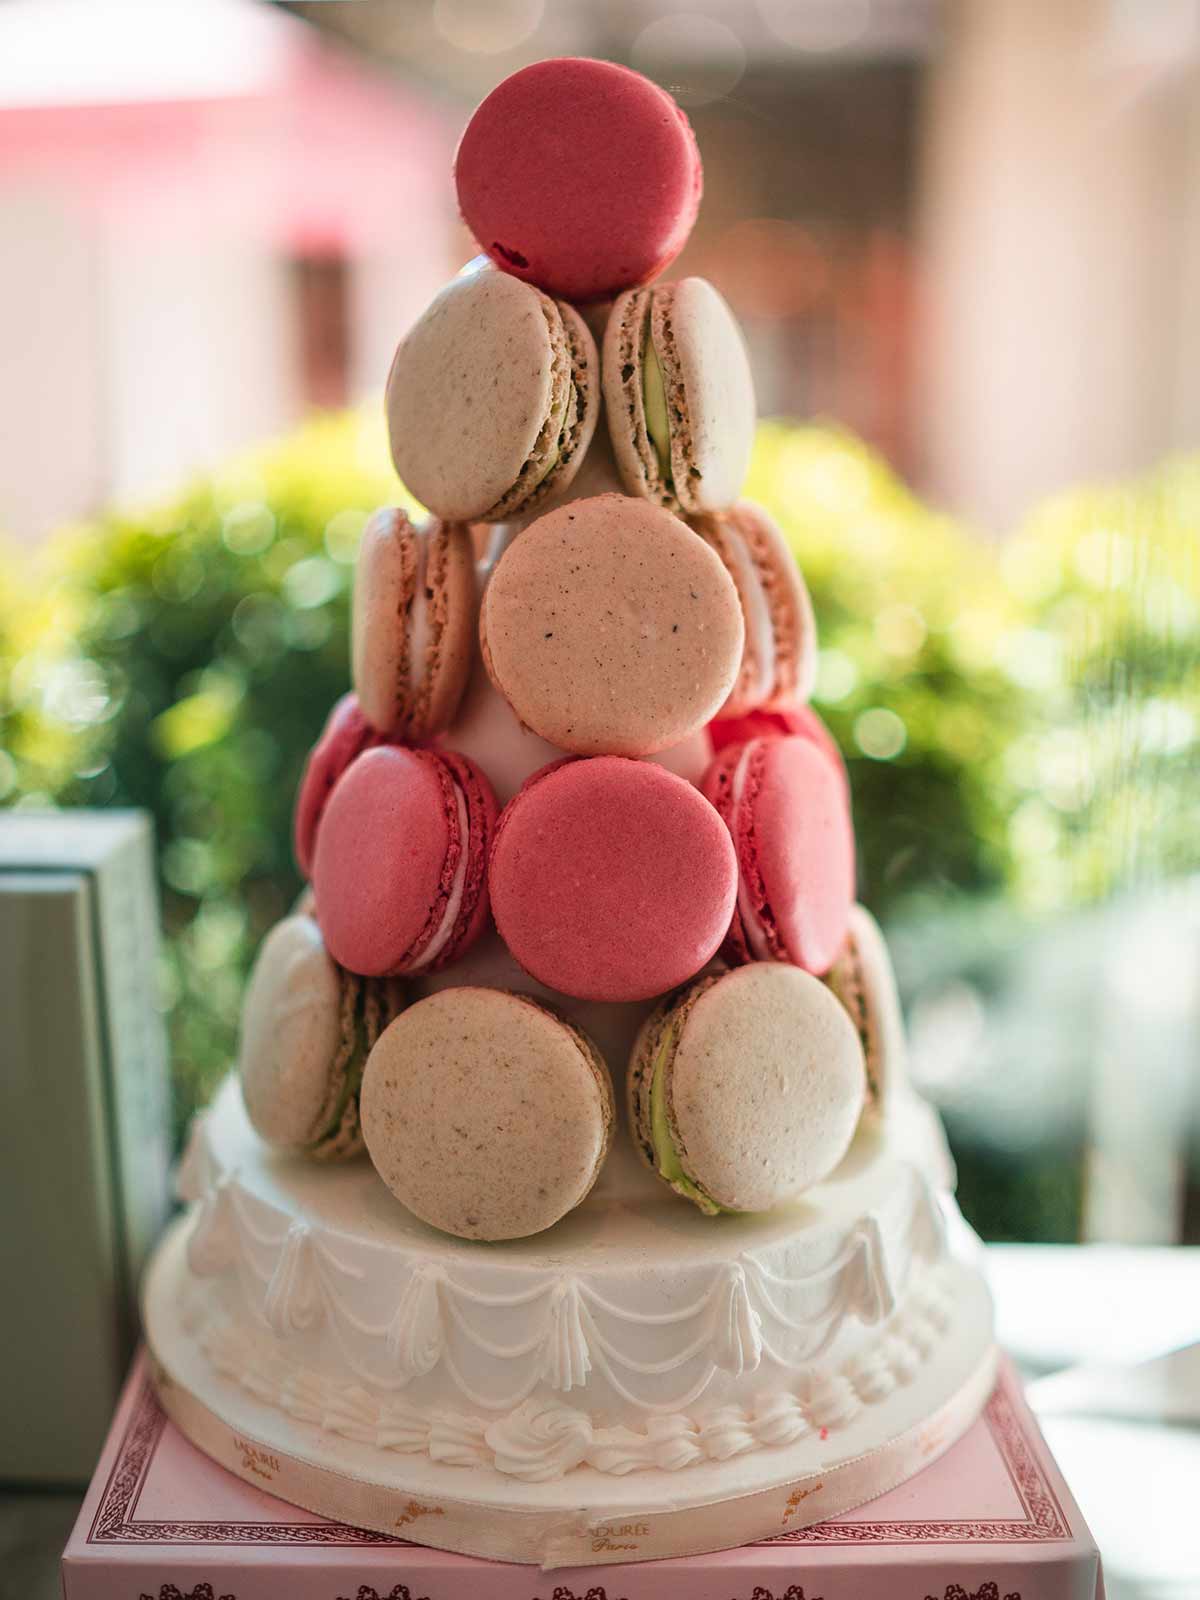 French macaron-topped cake in Ladurée, Cannes, France